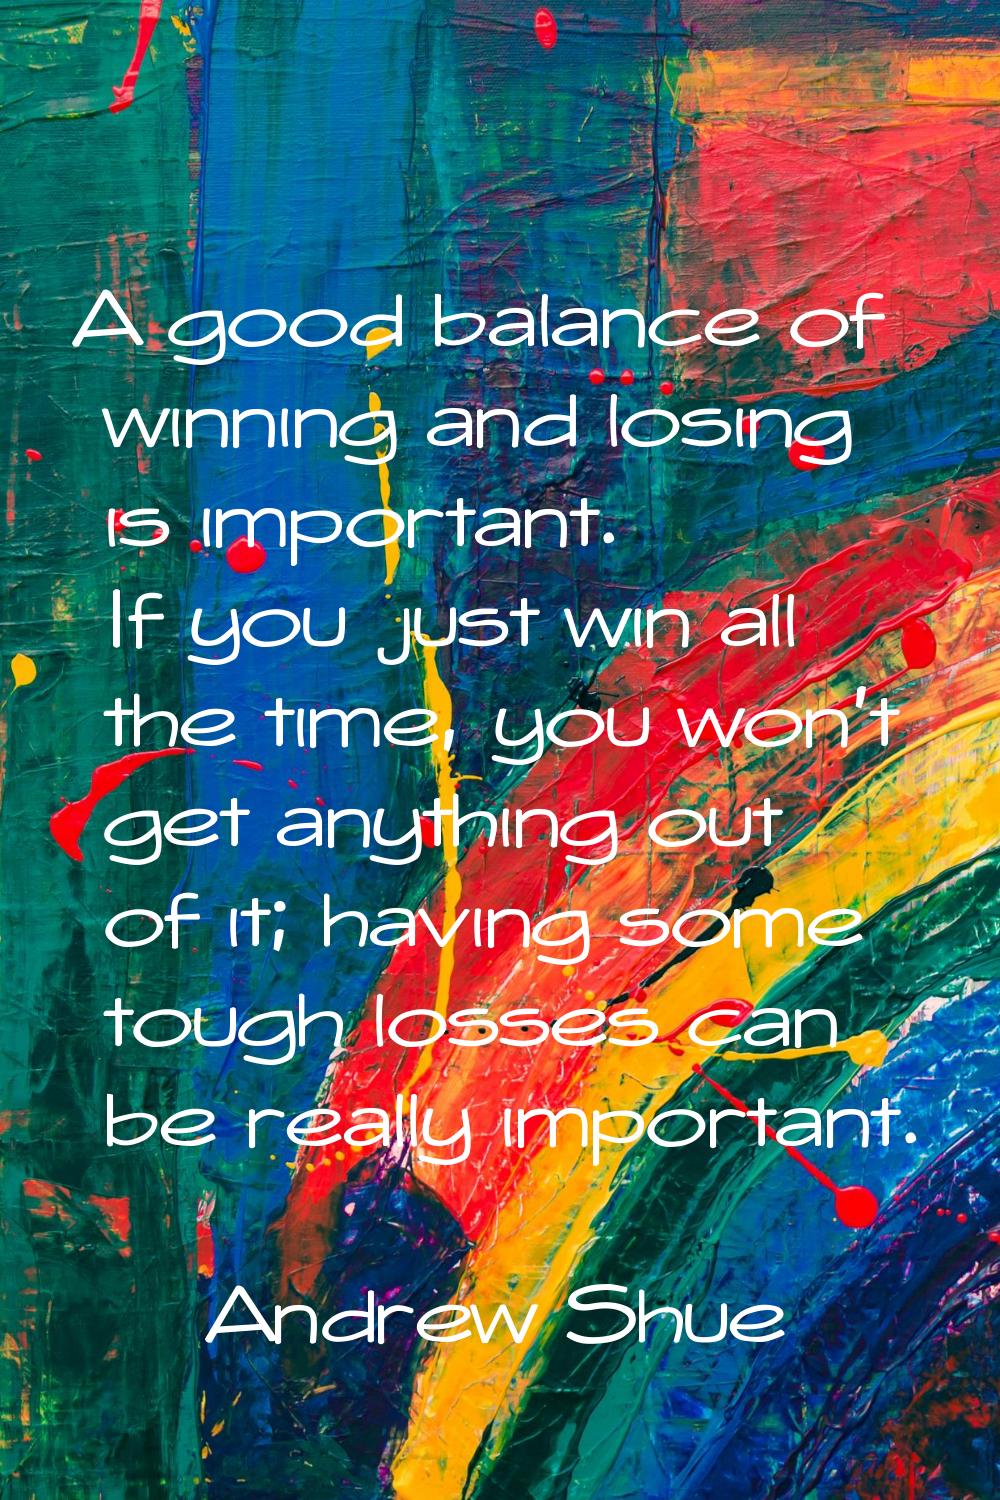 A good balance of winning and losing is important. If you just win all the time, you won't get anyt